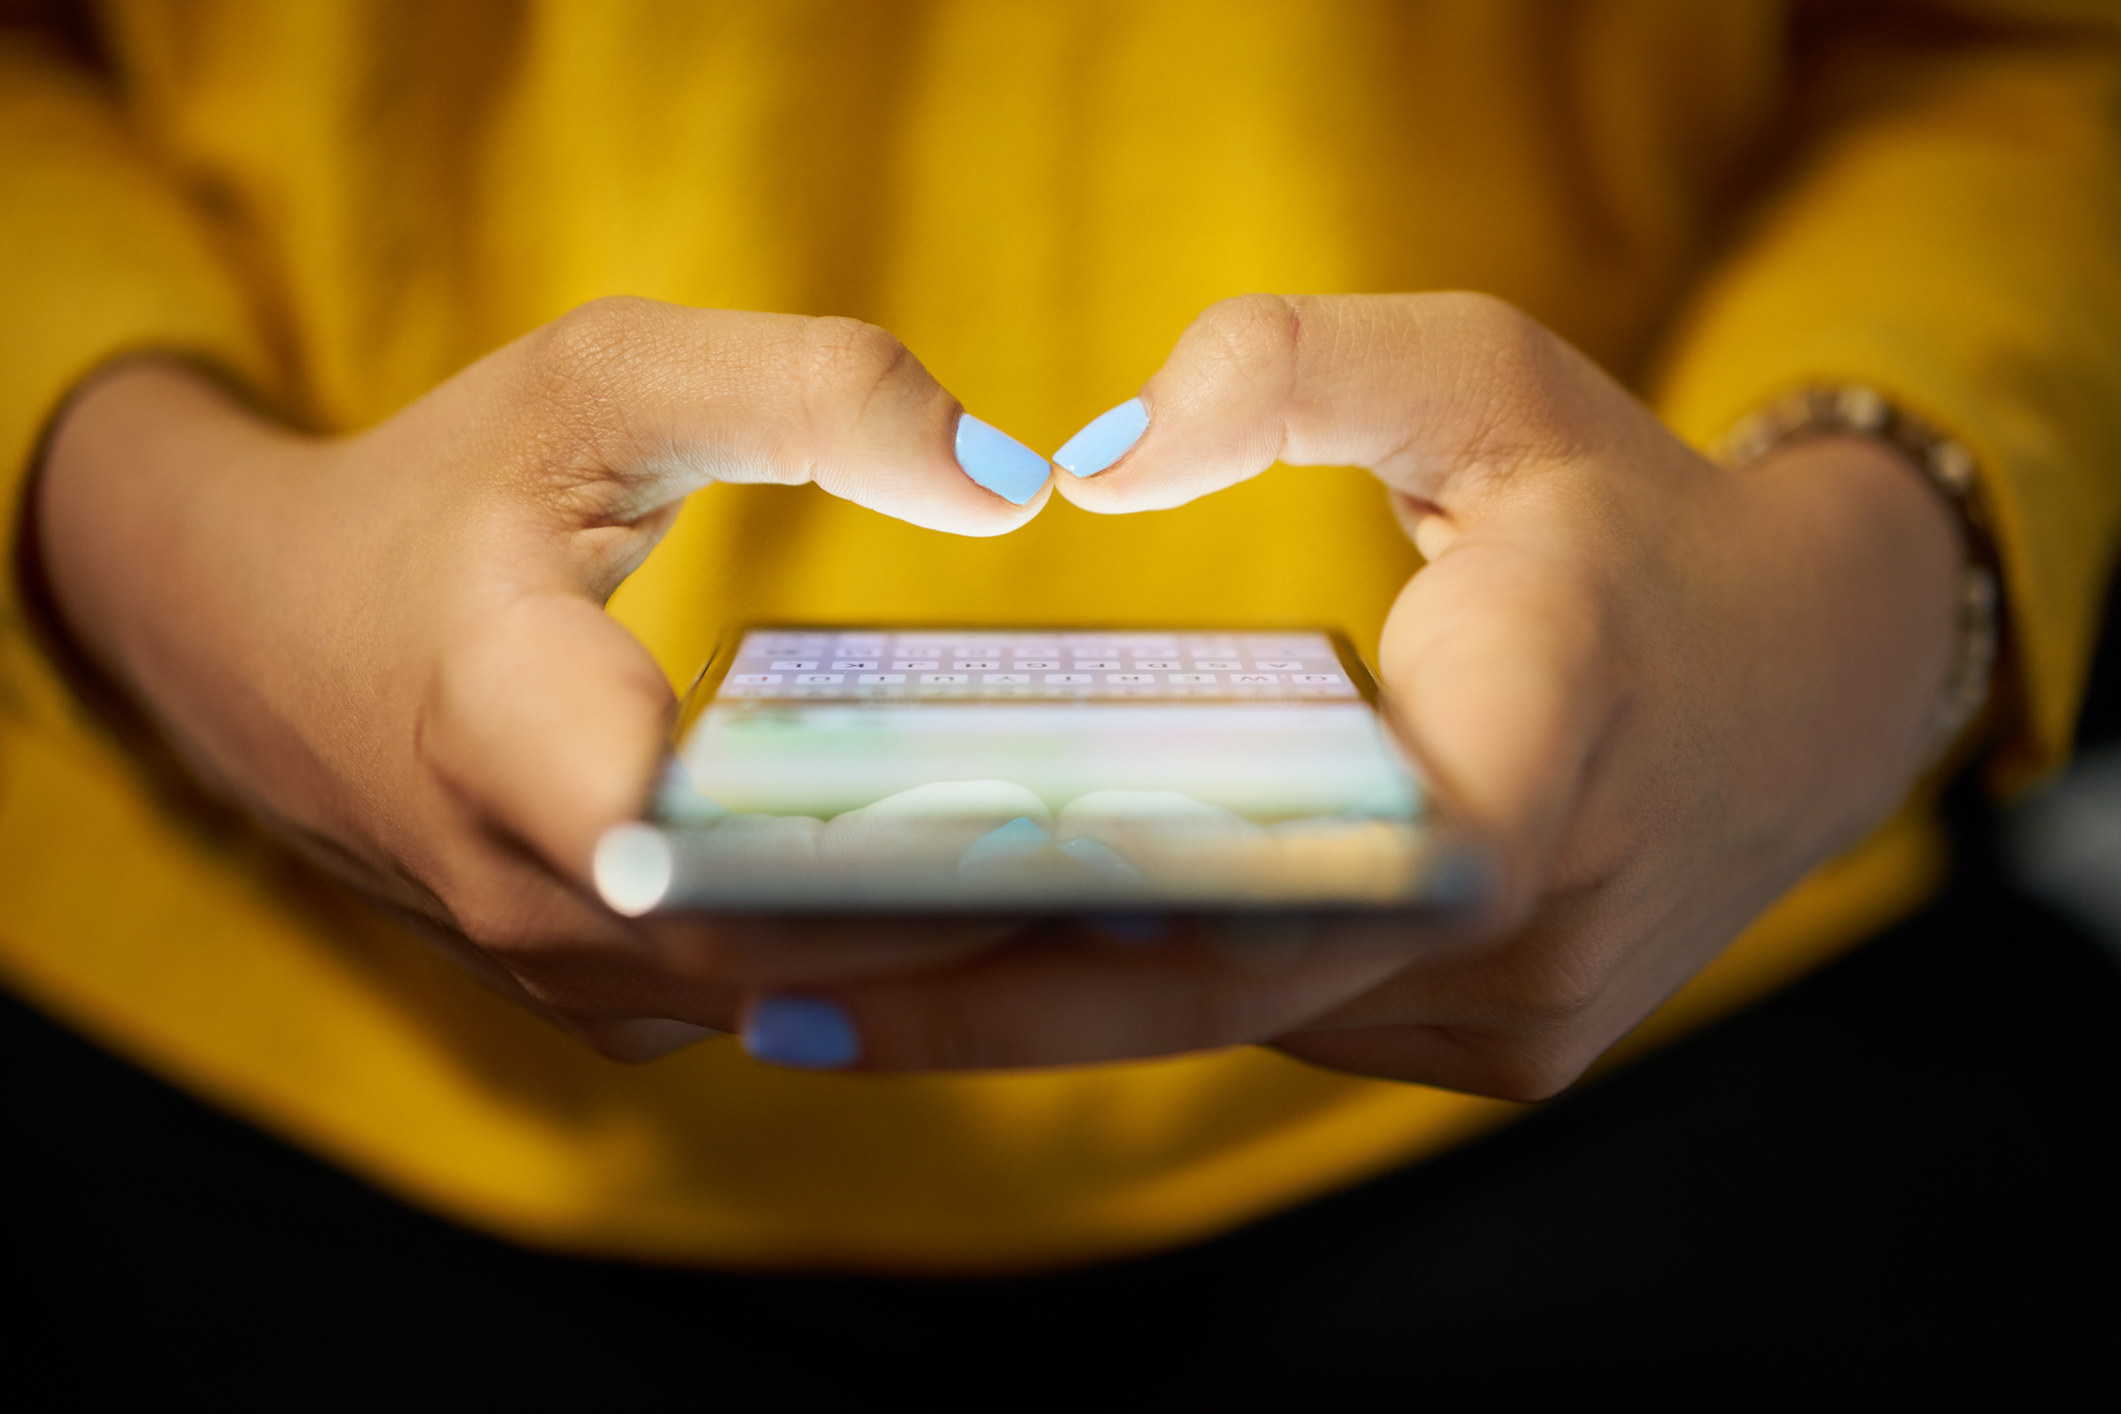 A stock image of hands holding a phone as they text